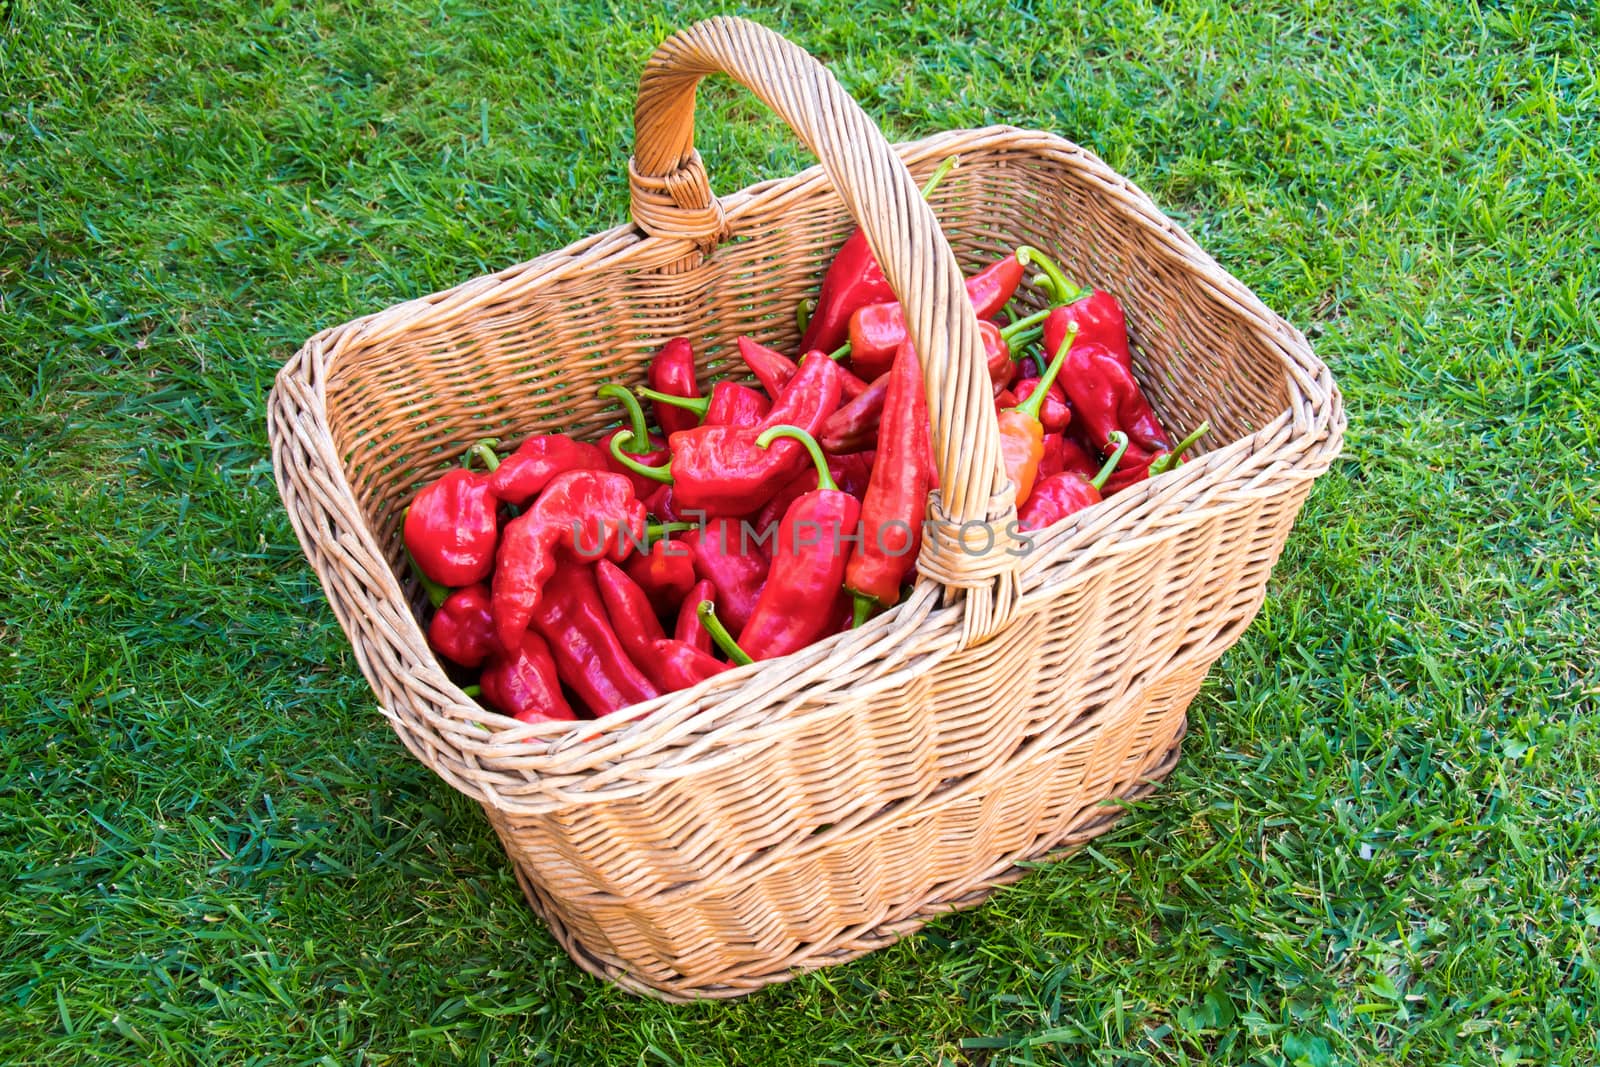 Organically grown red pepper in a basket made of twigs on a grass.